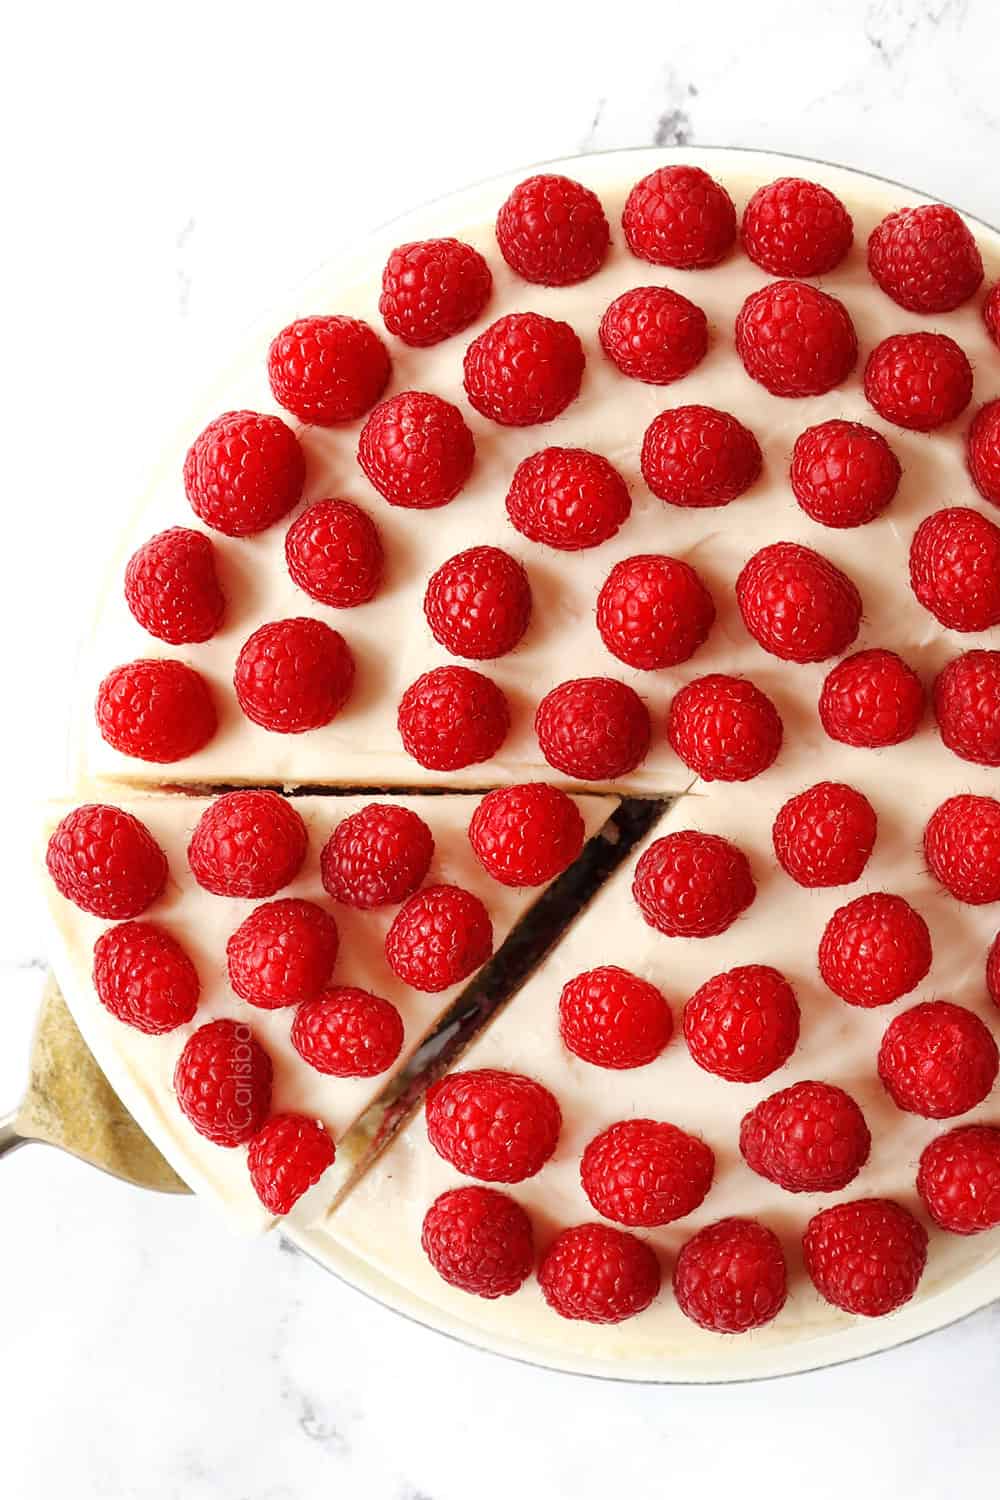 showing how to make white chocolate raspberry cake by covering the top with raspberries